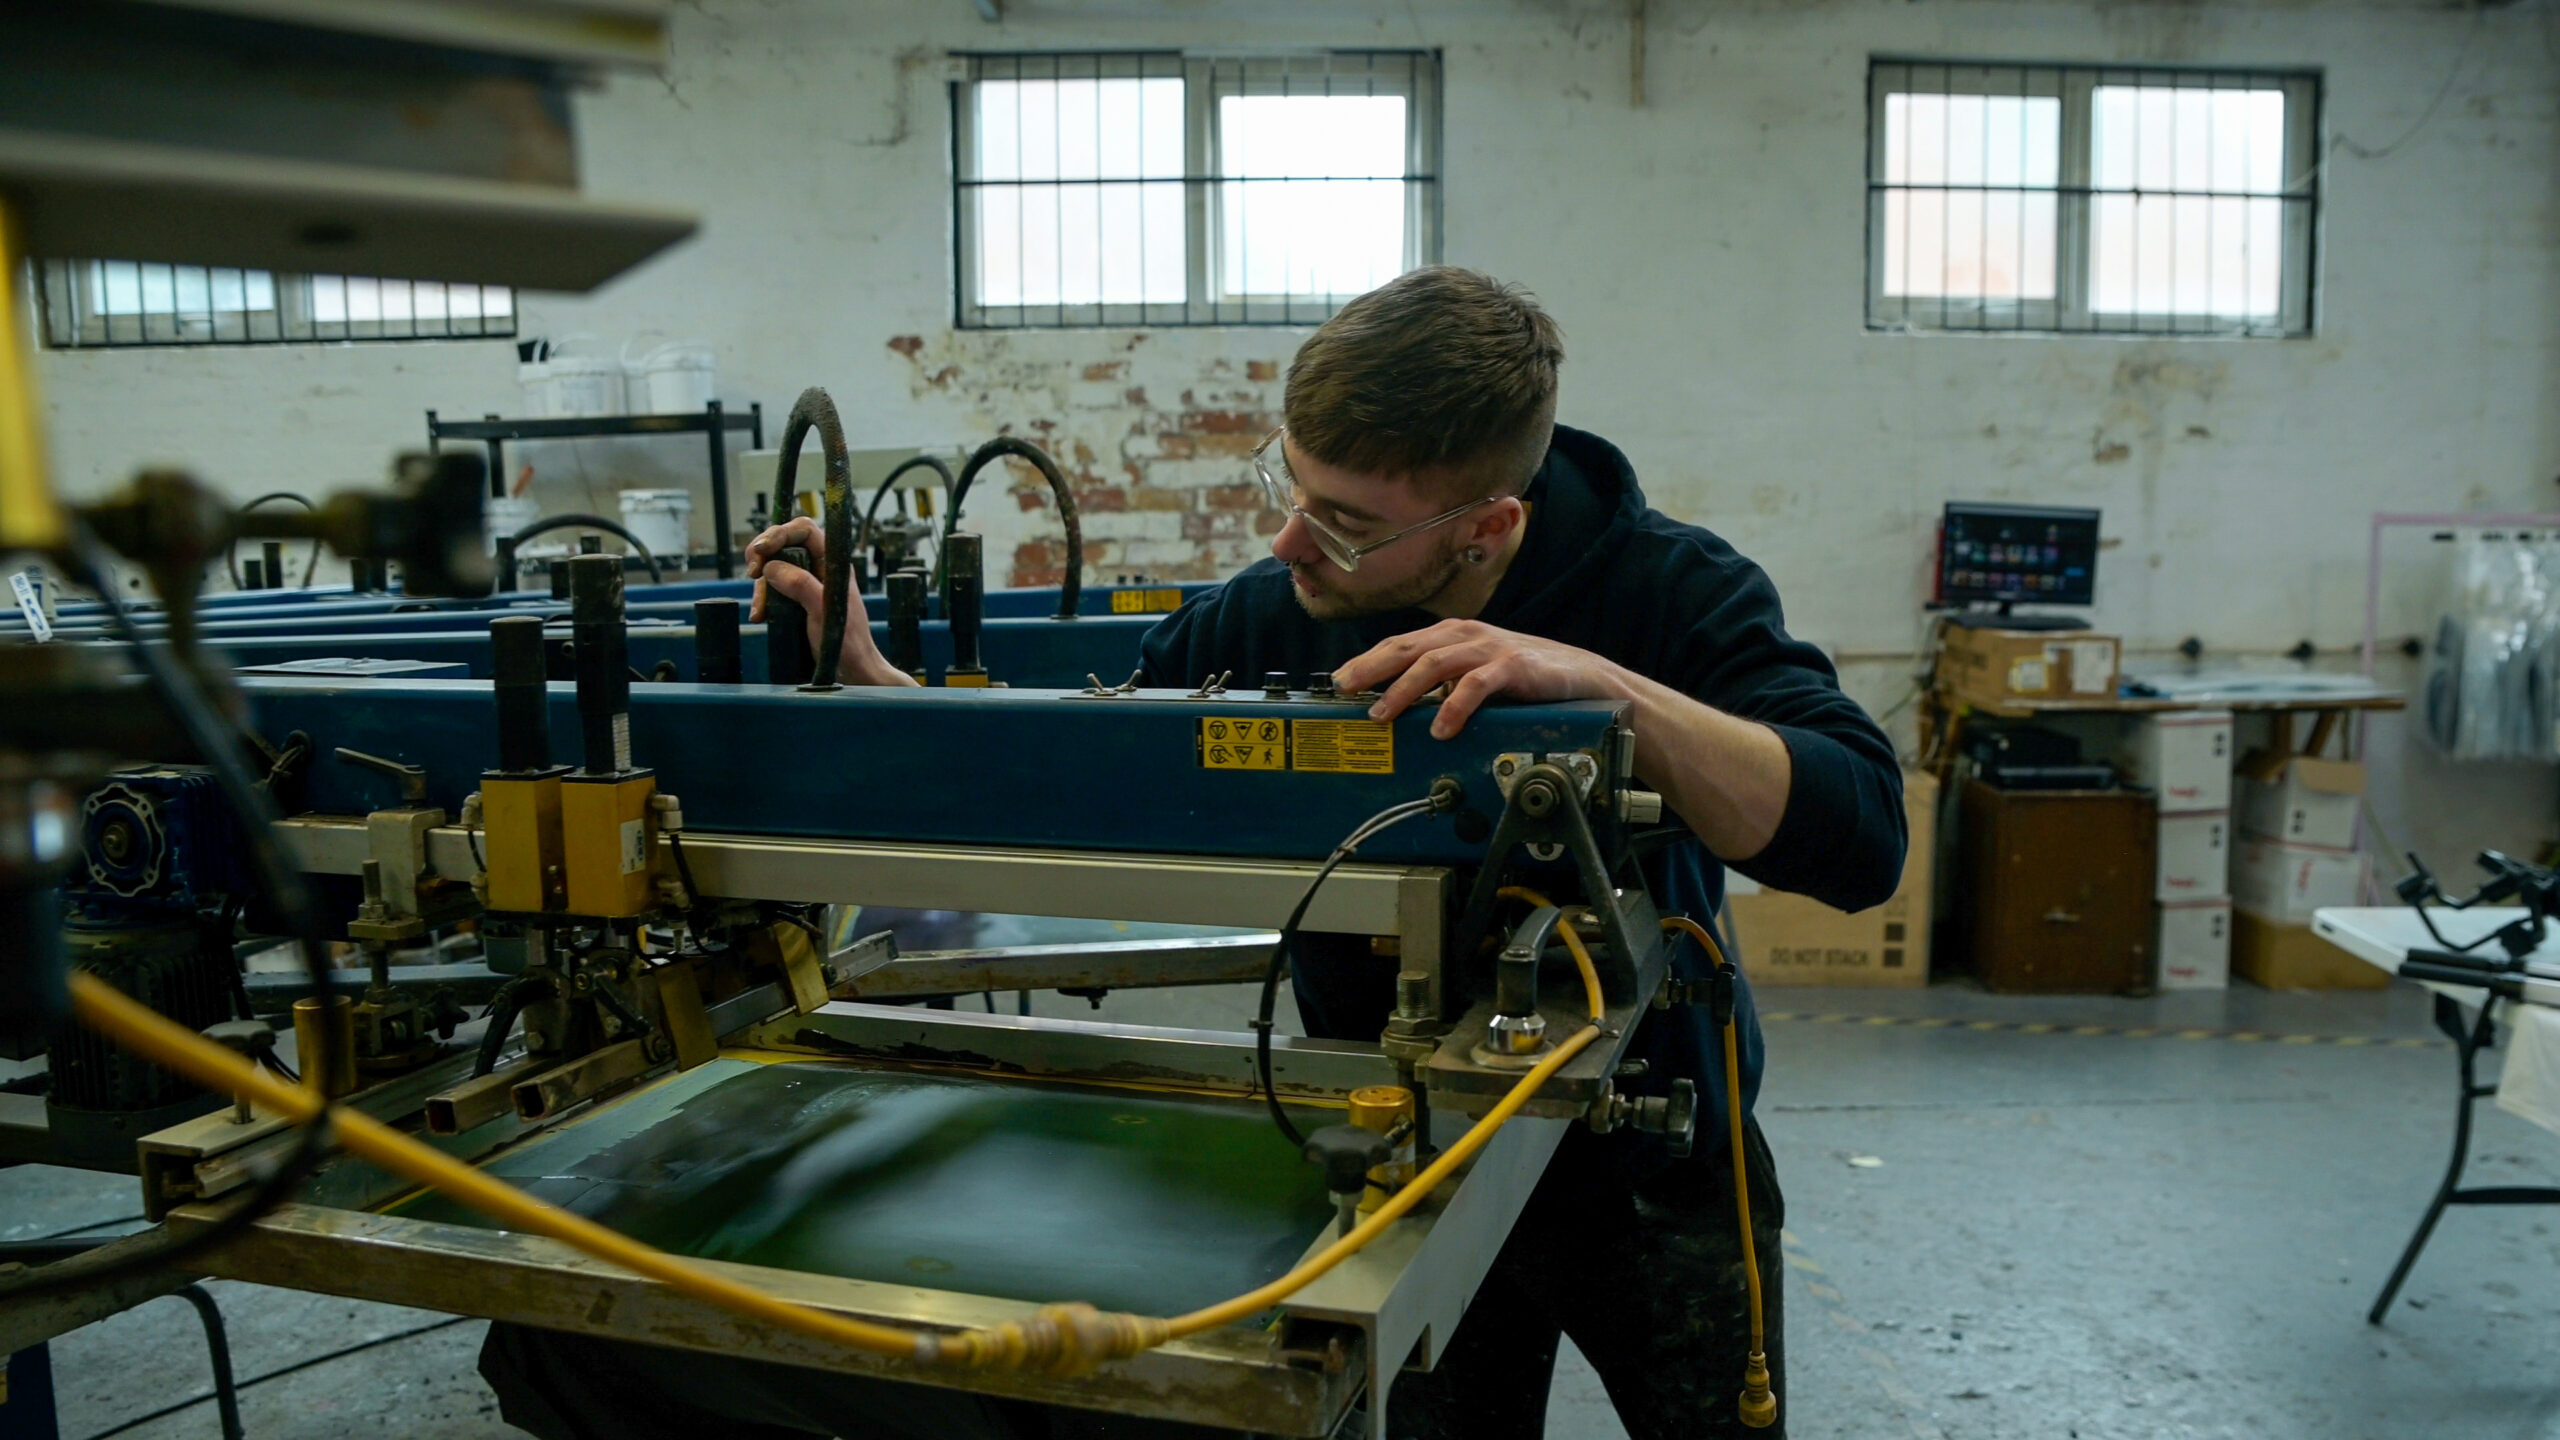 "screen printing technician working on an automated print press to set up a bulk order design"